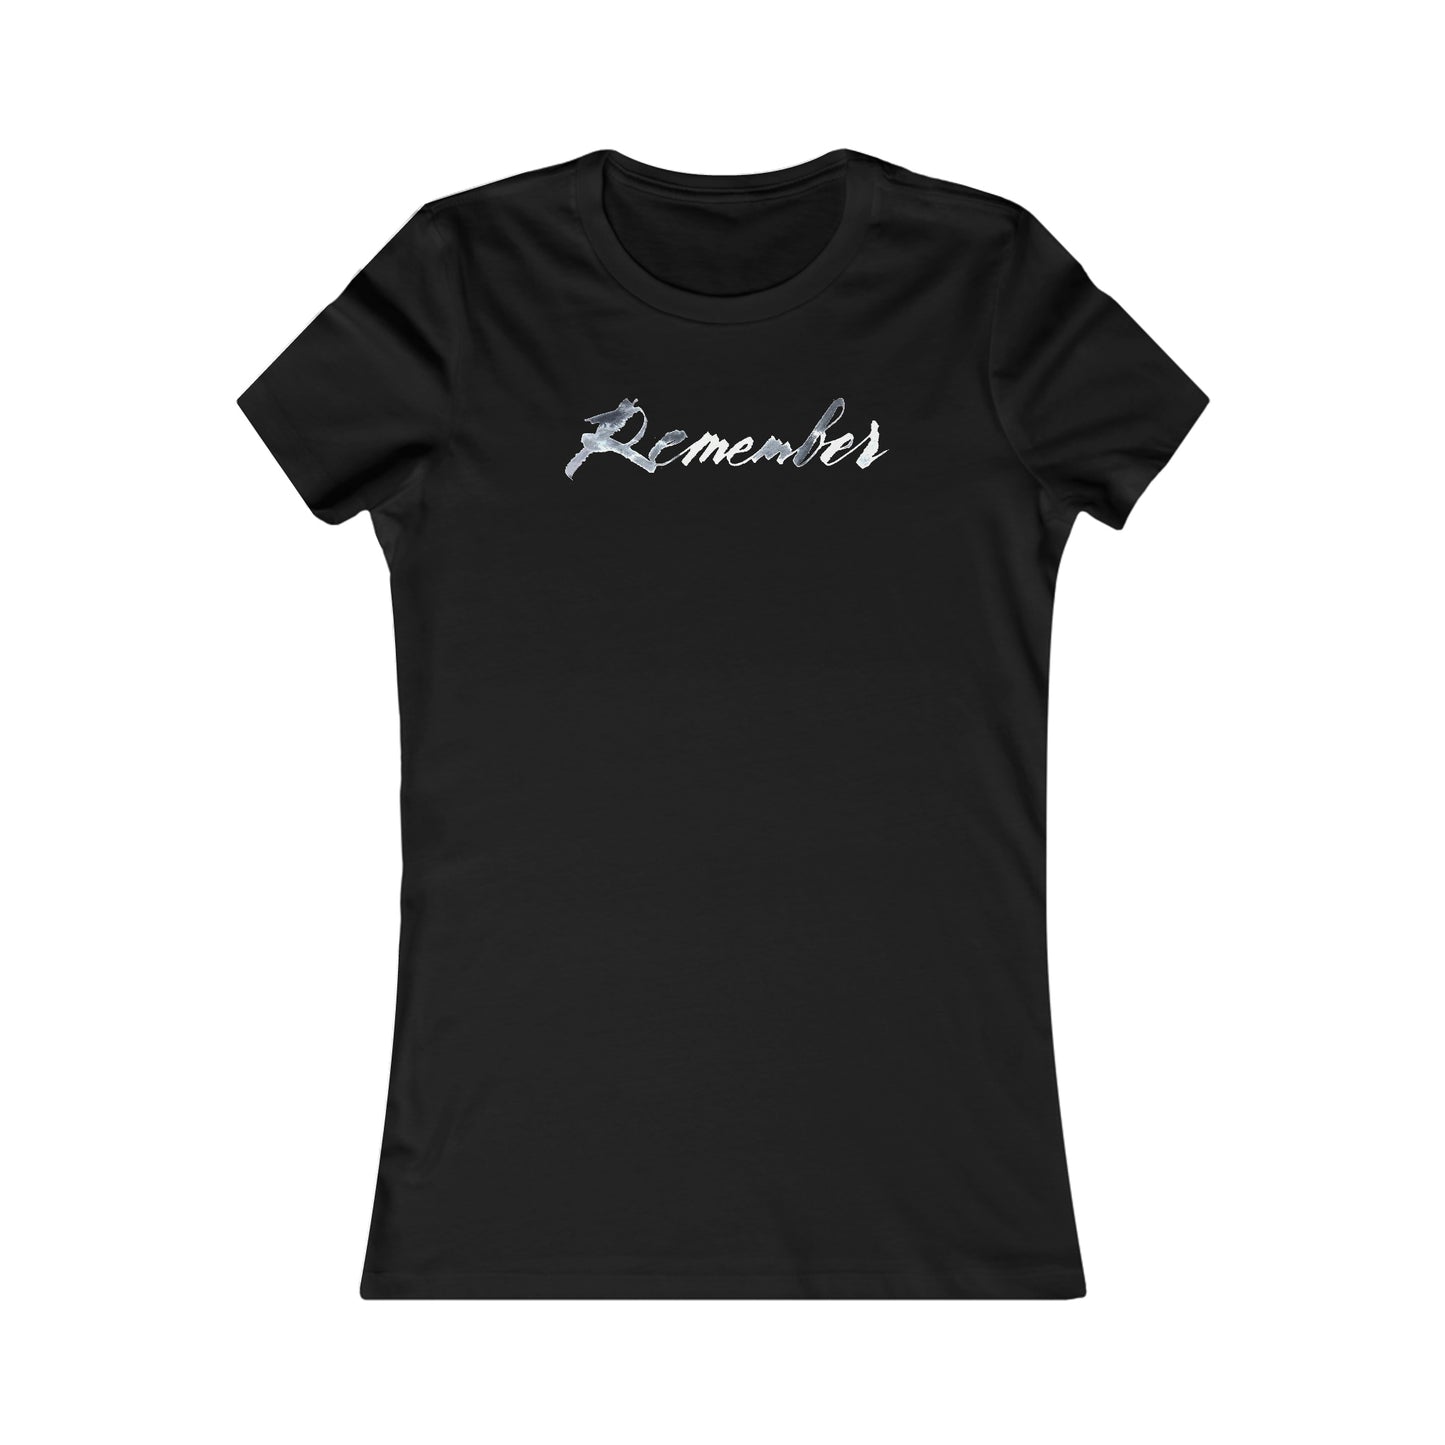 "Remember" Mixed Messages Fitted T-Shirt